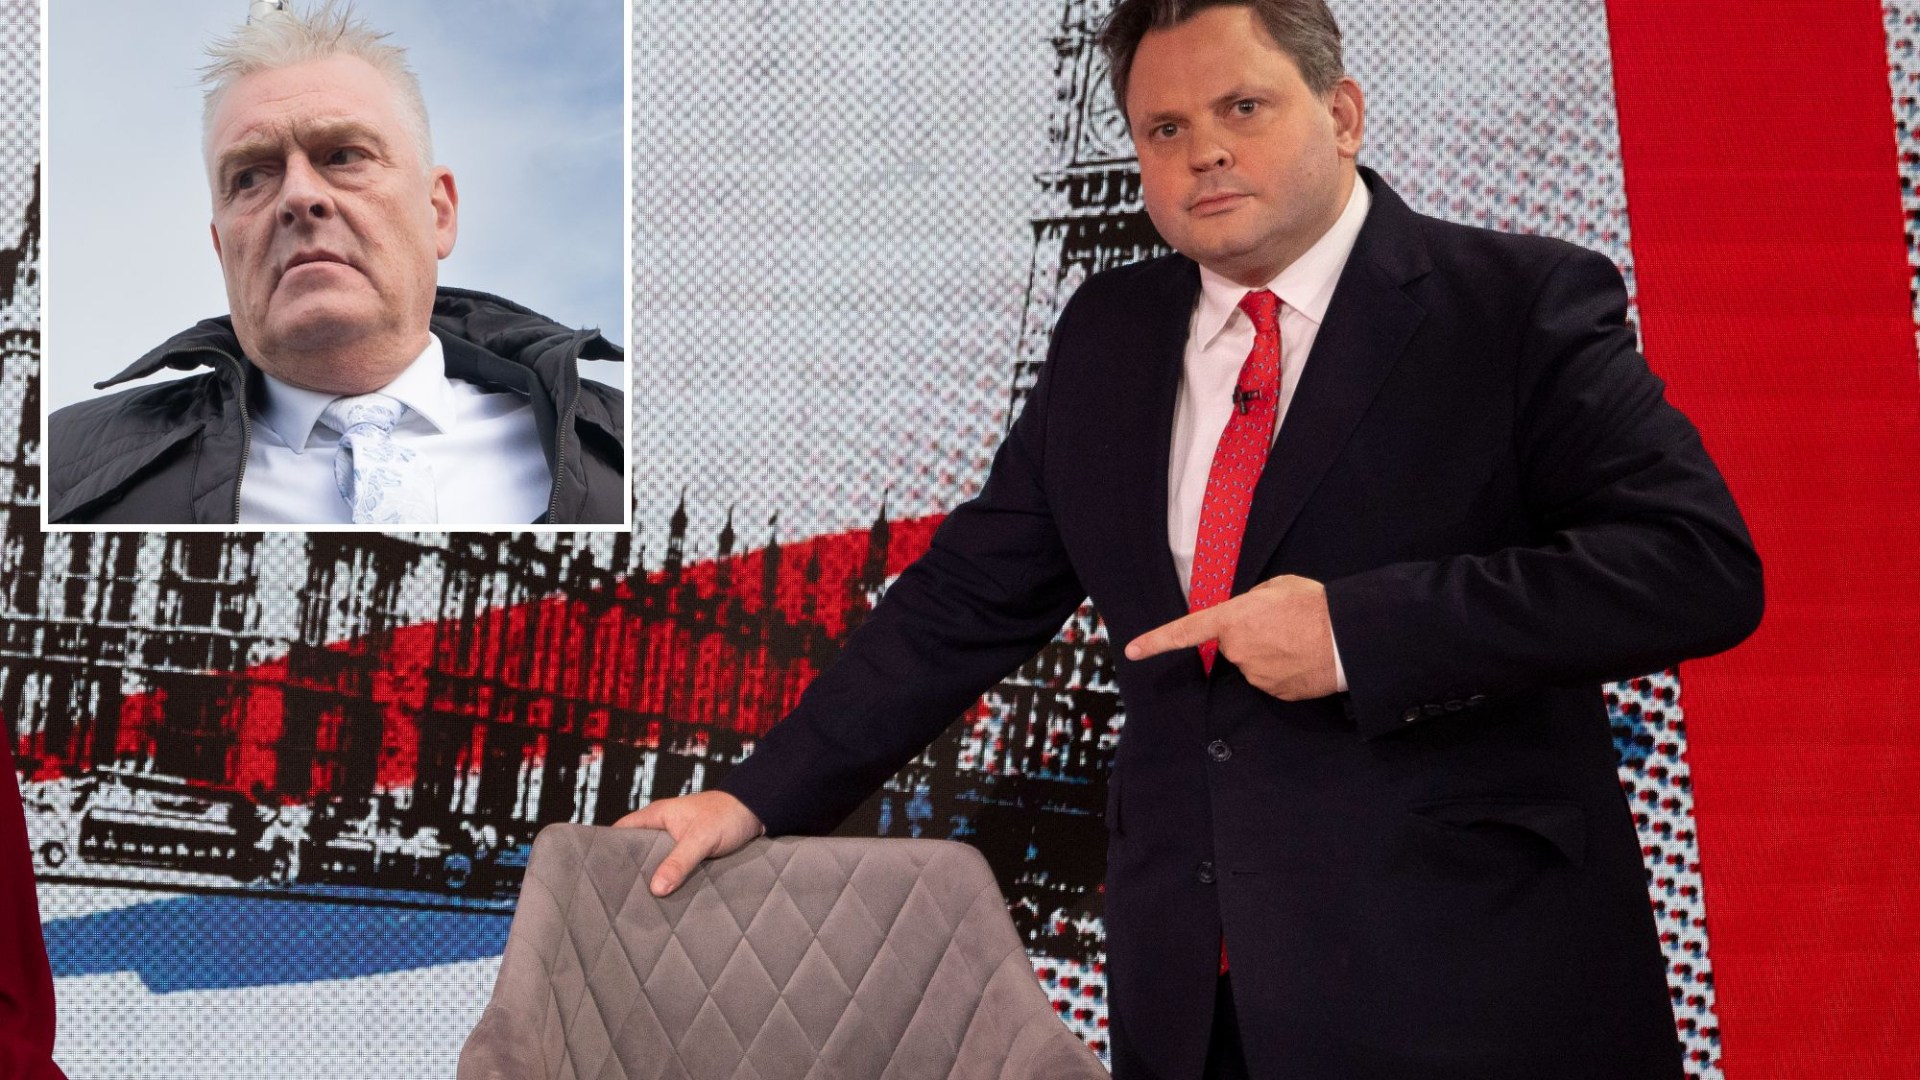 “Reform’s Only MP: Lee Anderson’s Bottle The Sun’s New Politics Show – How Interested is He in Gaining Your Support?” #LeeAnderson #Reform #Politics #MP #Support